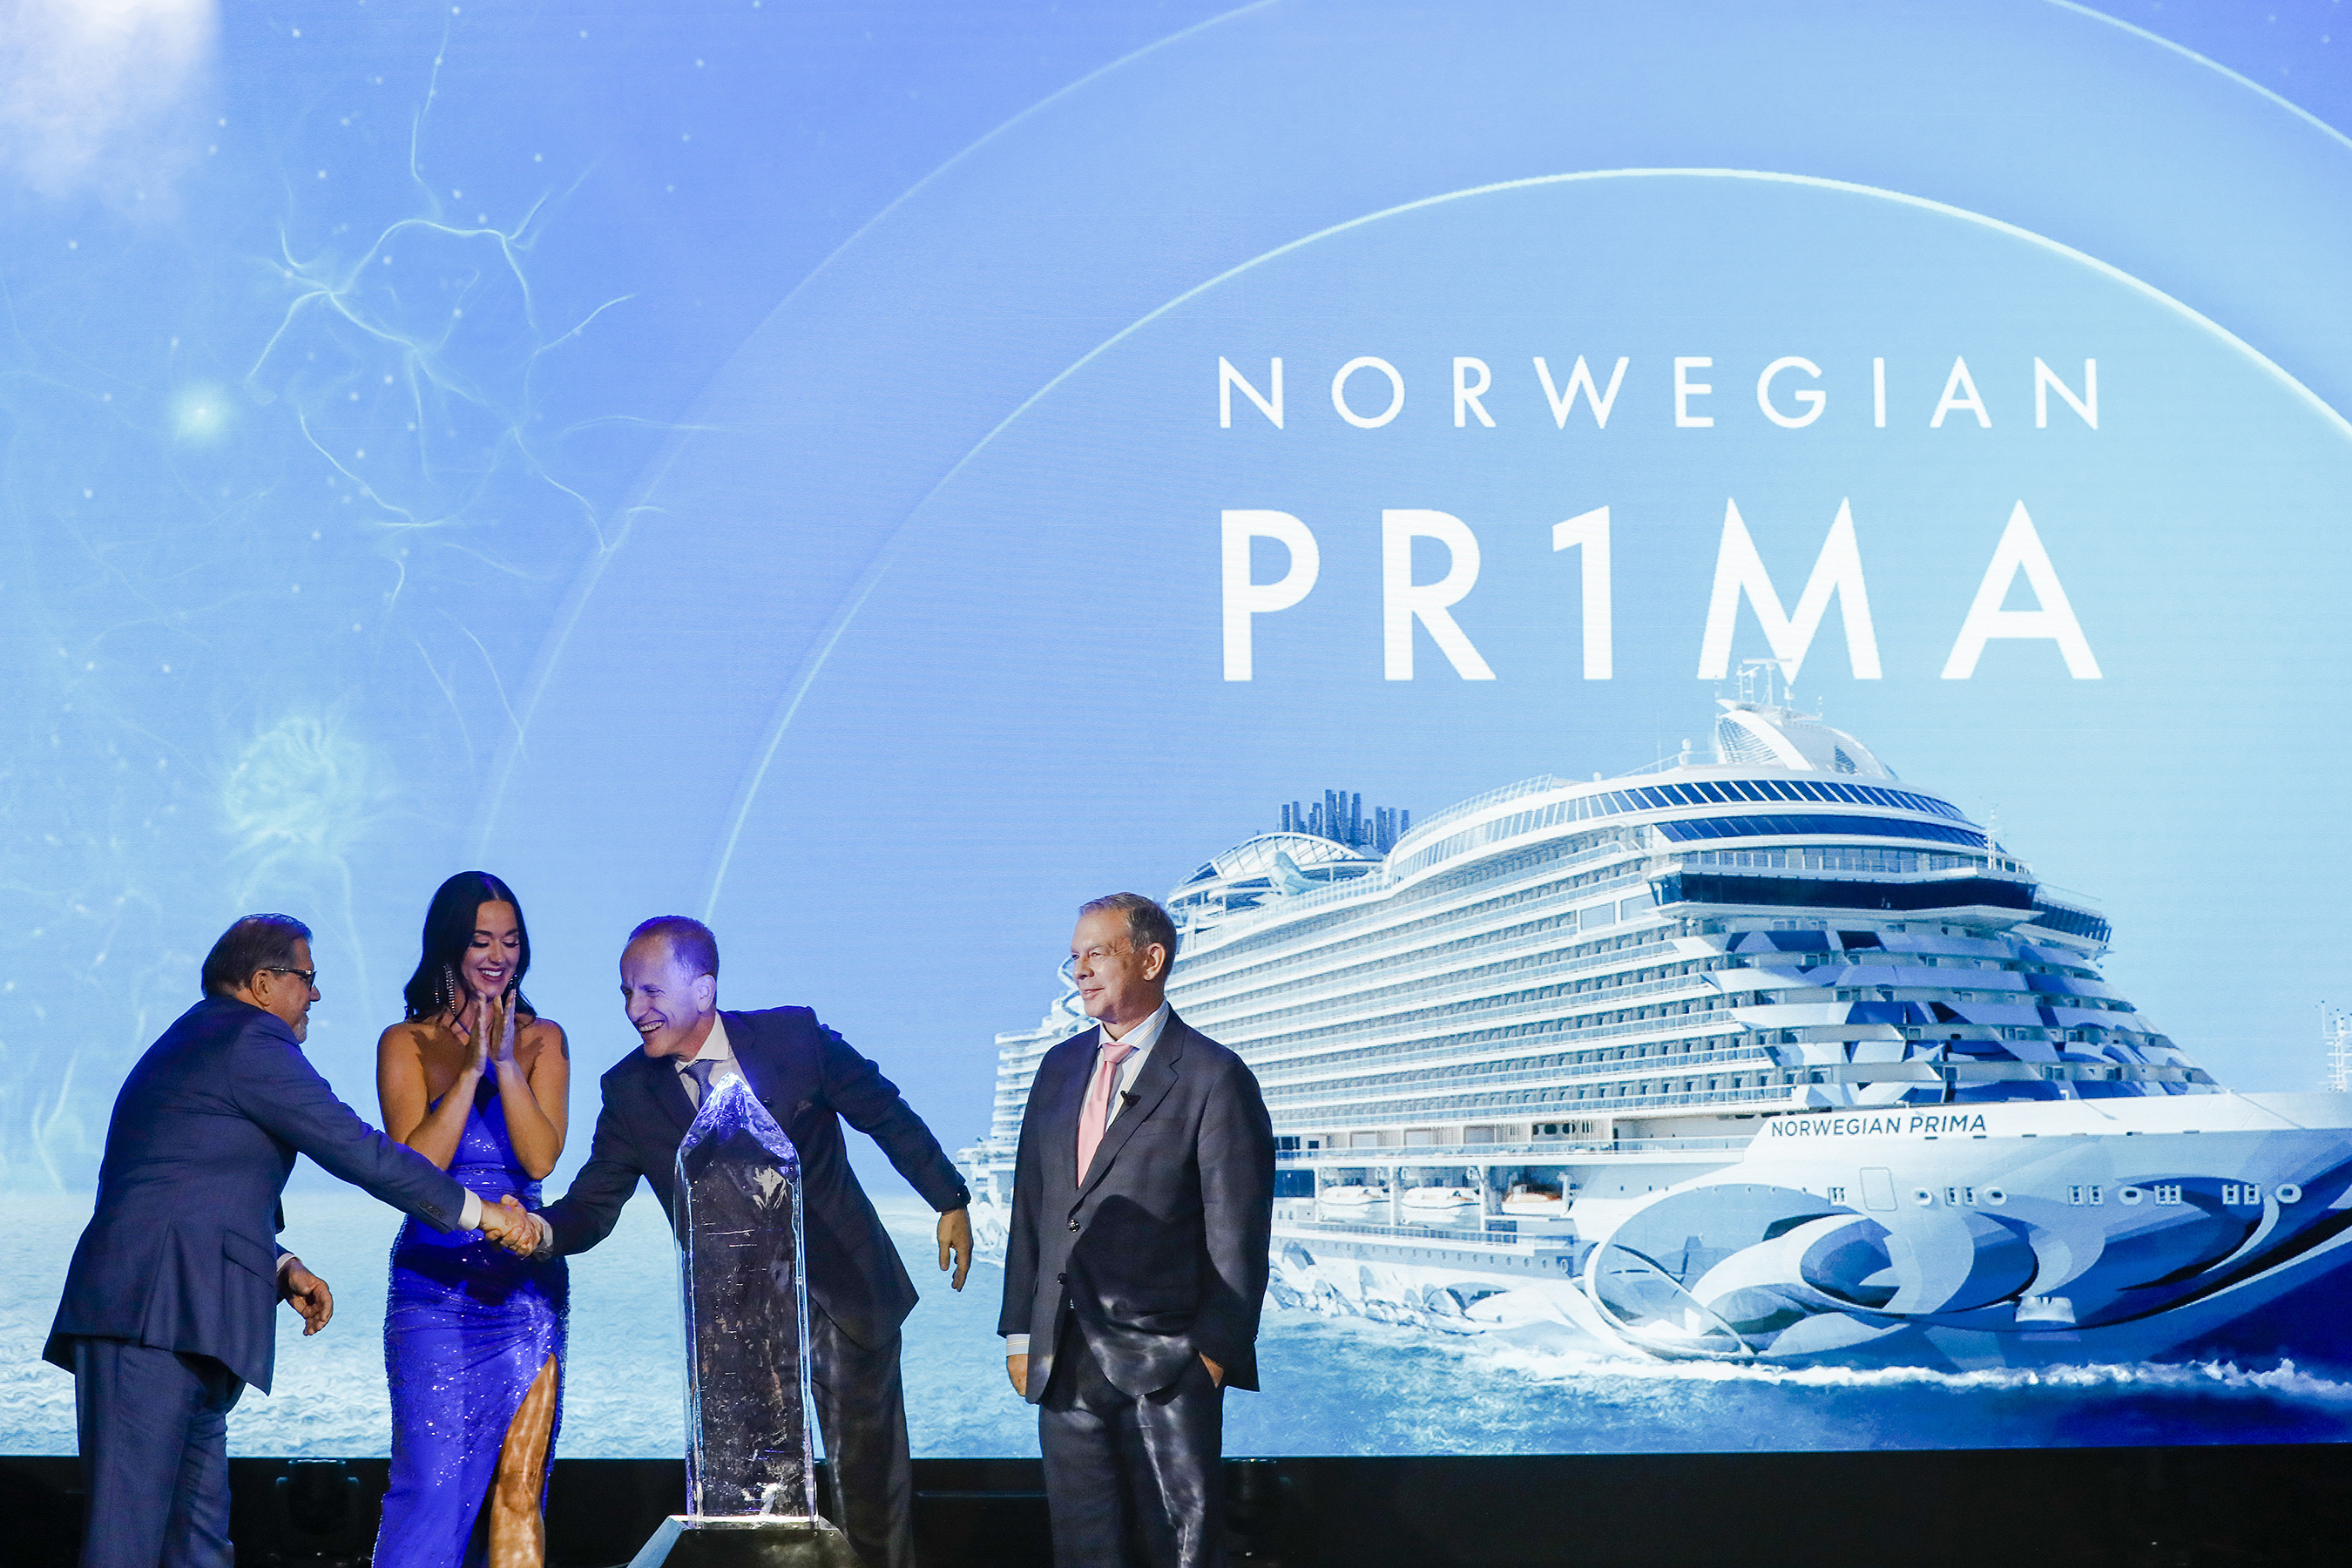 Global superstar and godmother of Norwegian Prima, Katy Perry, joins Norwegian Cruise Line executives in Reykjavik, Iceland to officially christen and name NCL’s 18th vessel in its leading-edge Prima Class.